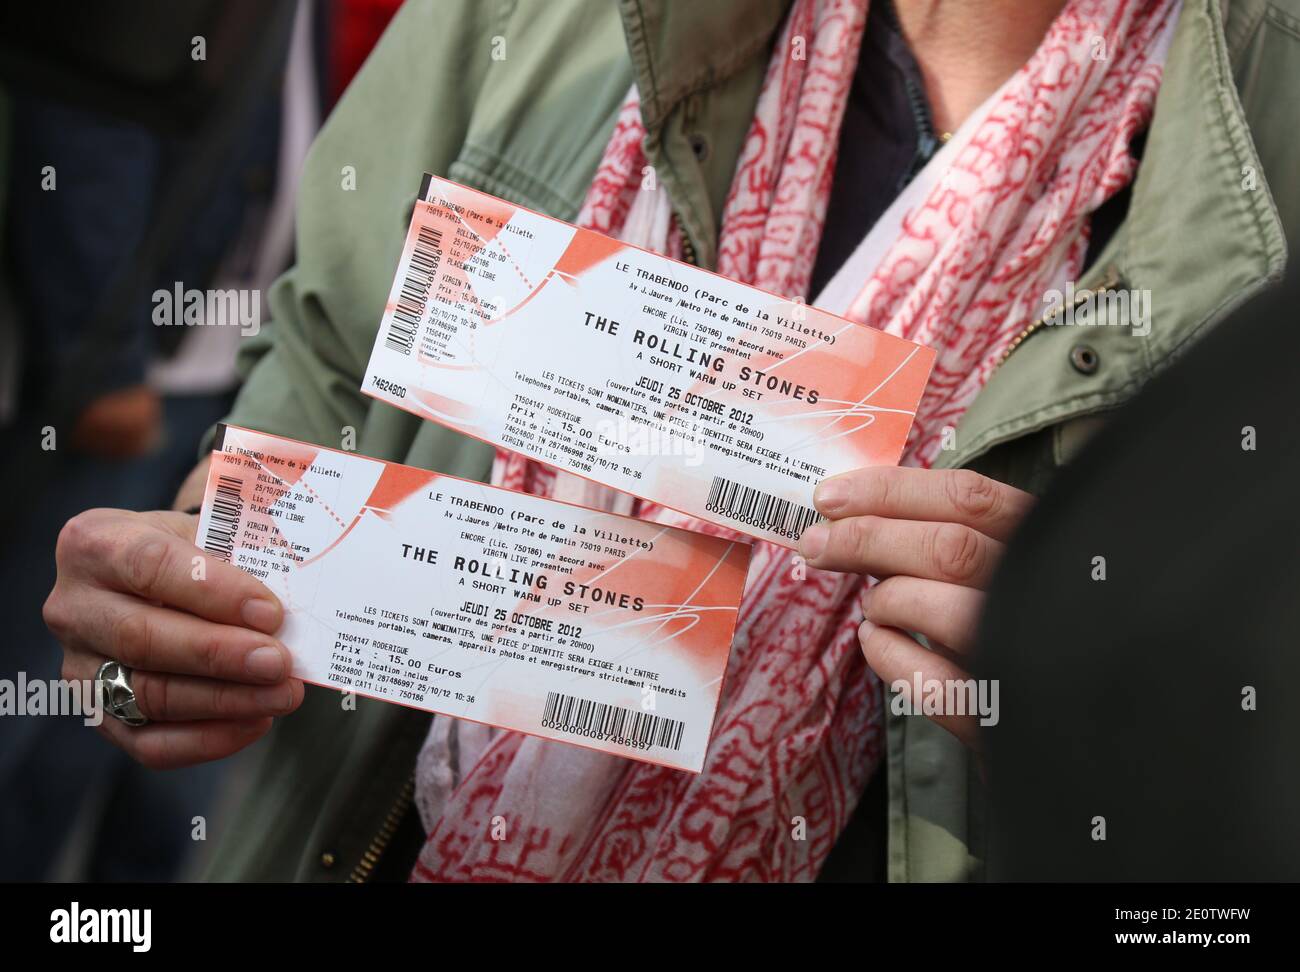 A person shows tickets for a concert held the same day in the French  capital by British rock legends The Rolling Stones at the Virgin megastore  on Champs Elysees in Paris, France